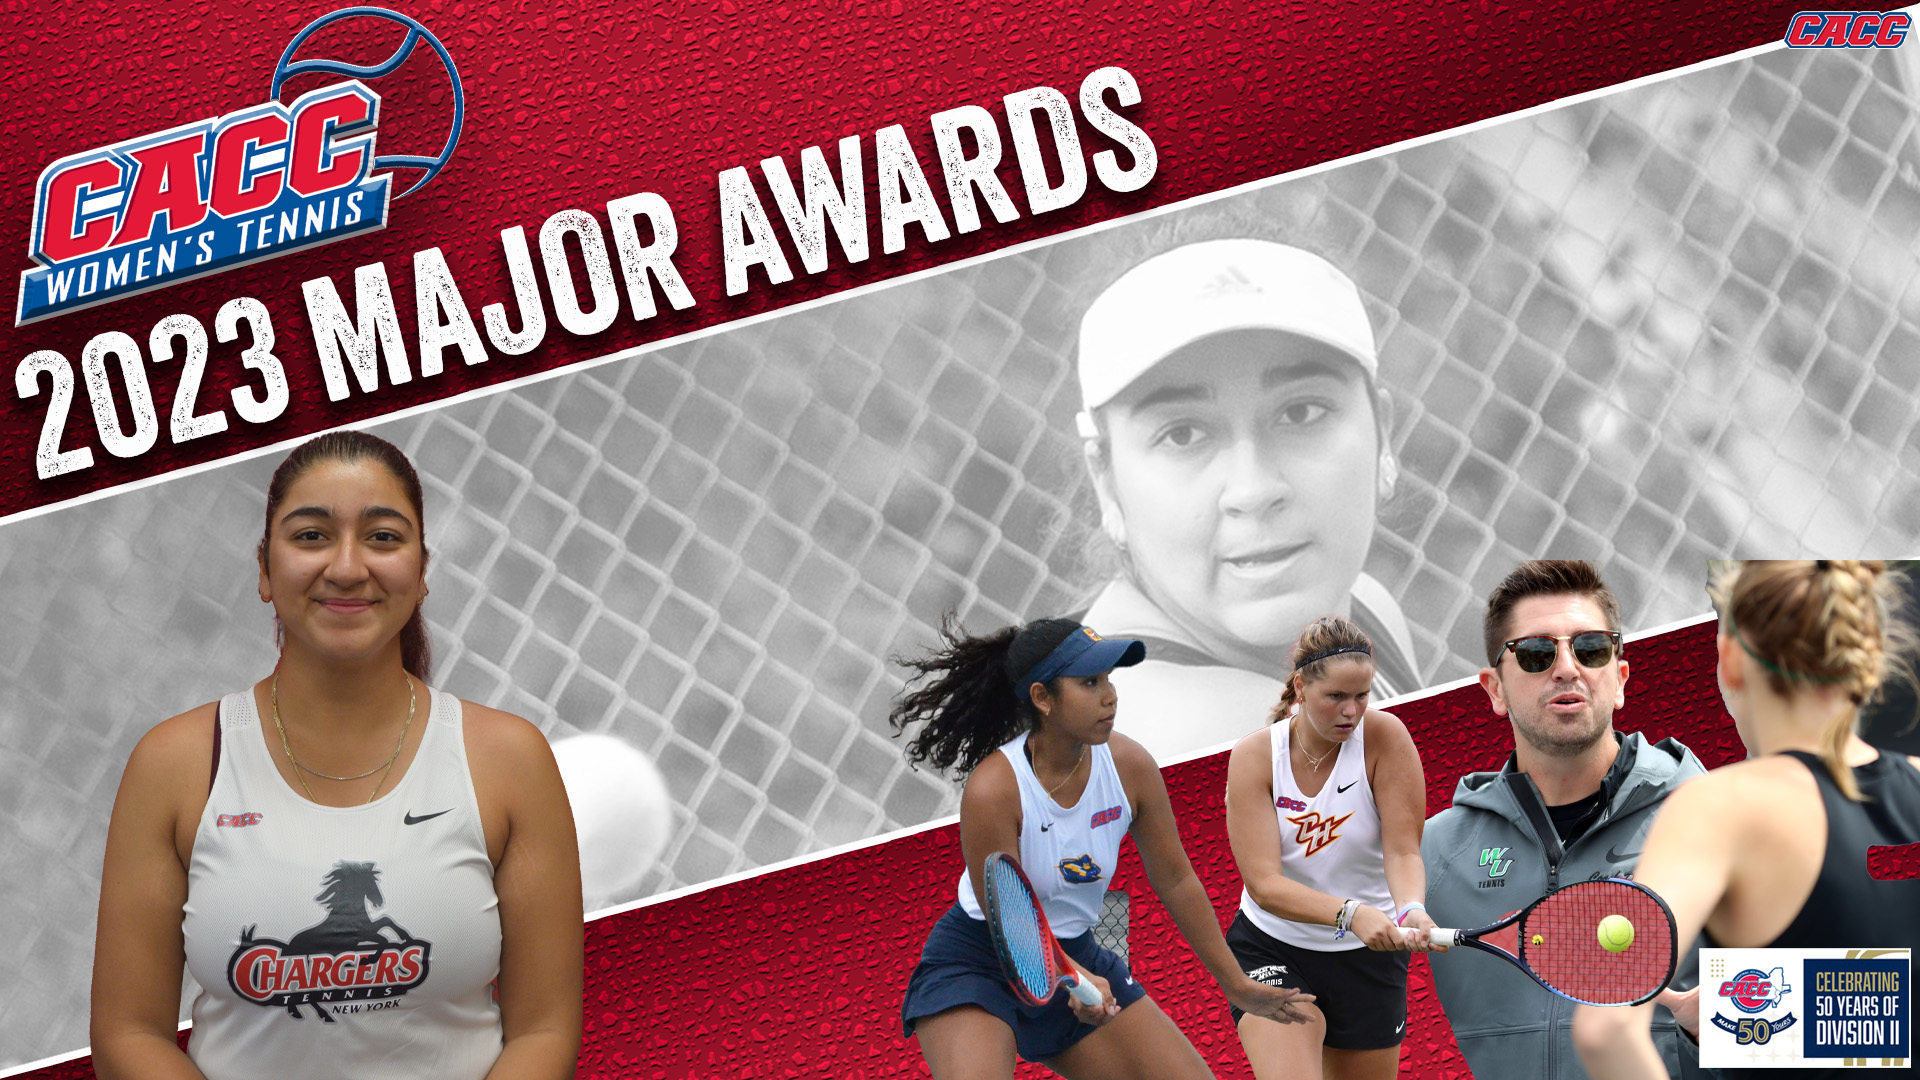 DOMINICAN'S BIPASHA MEHN NAMED 2023 CACC WTEN PLAYER OF THE YEAR